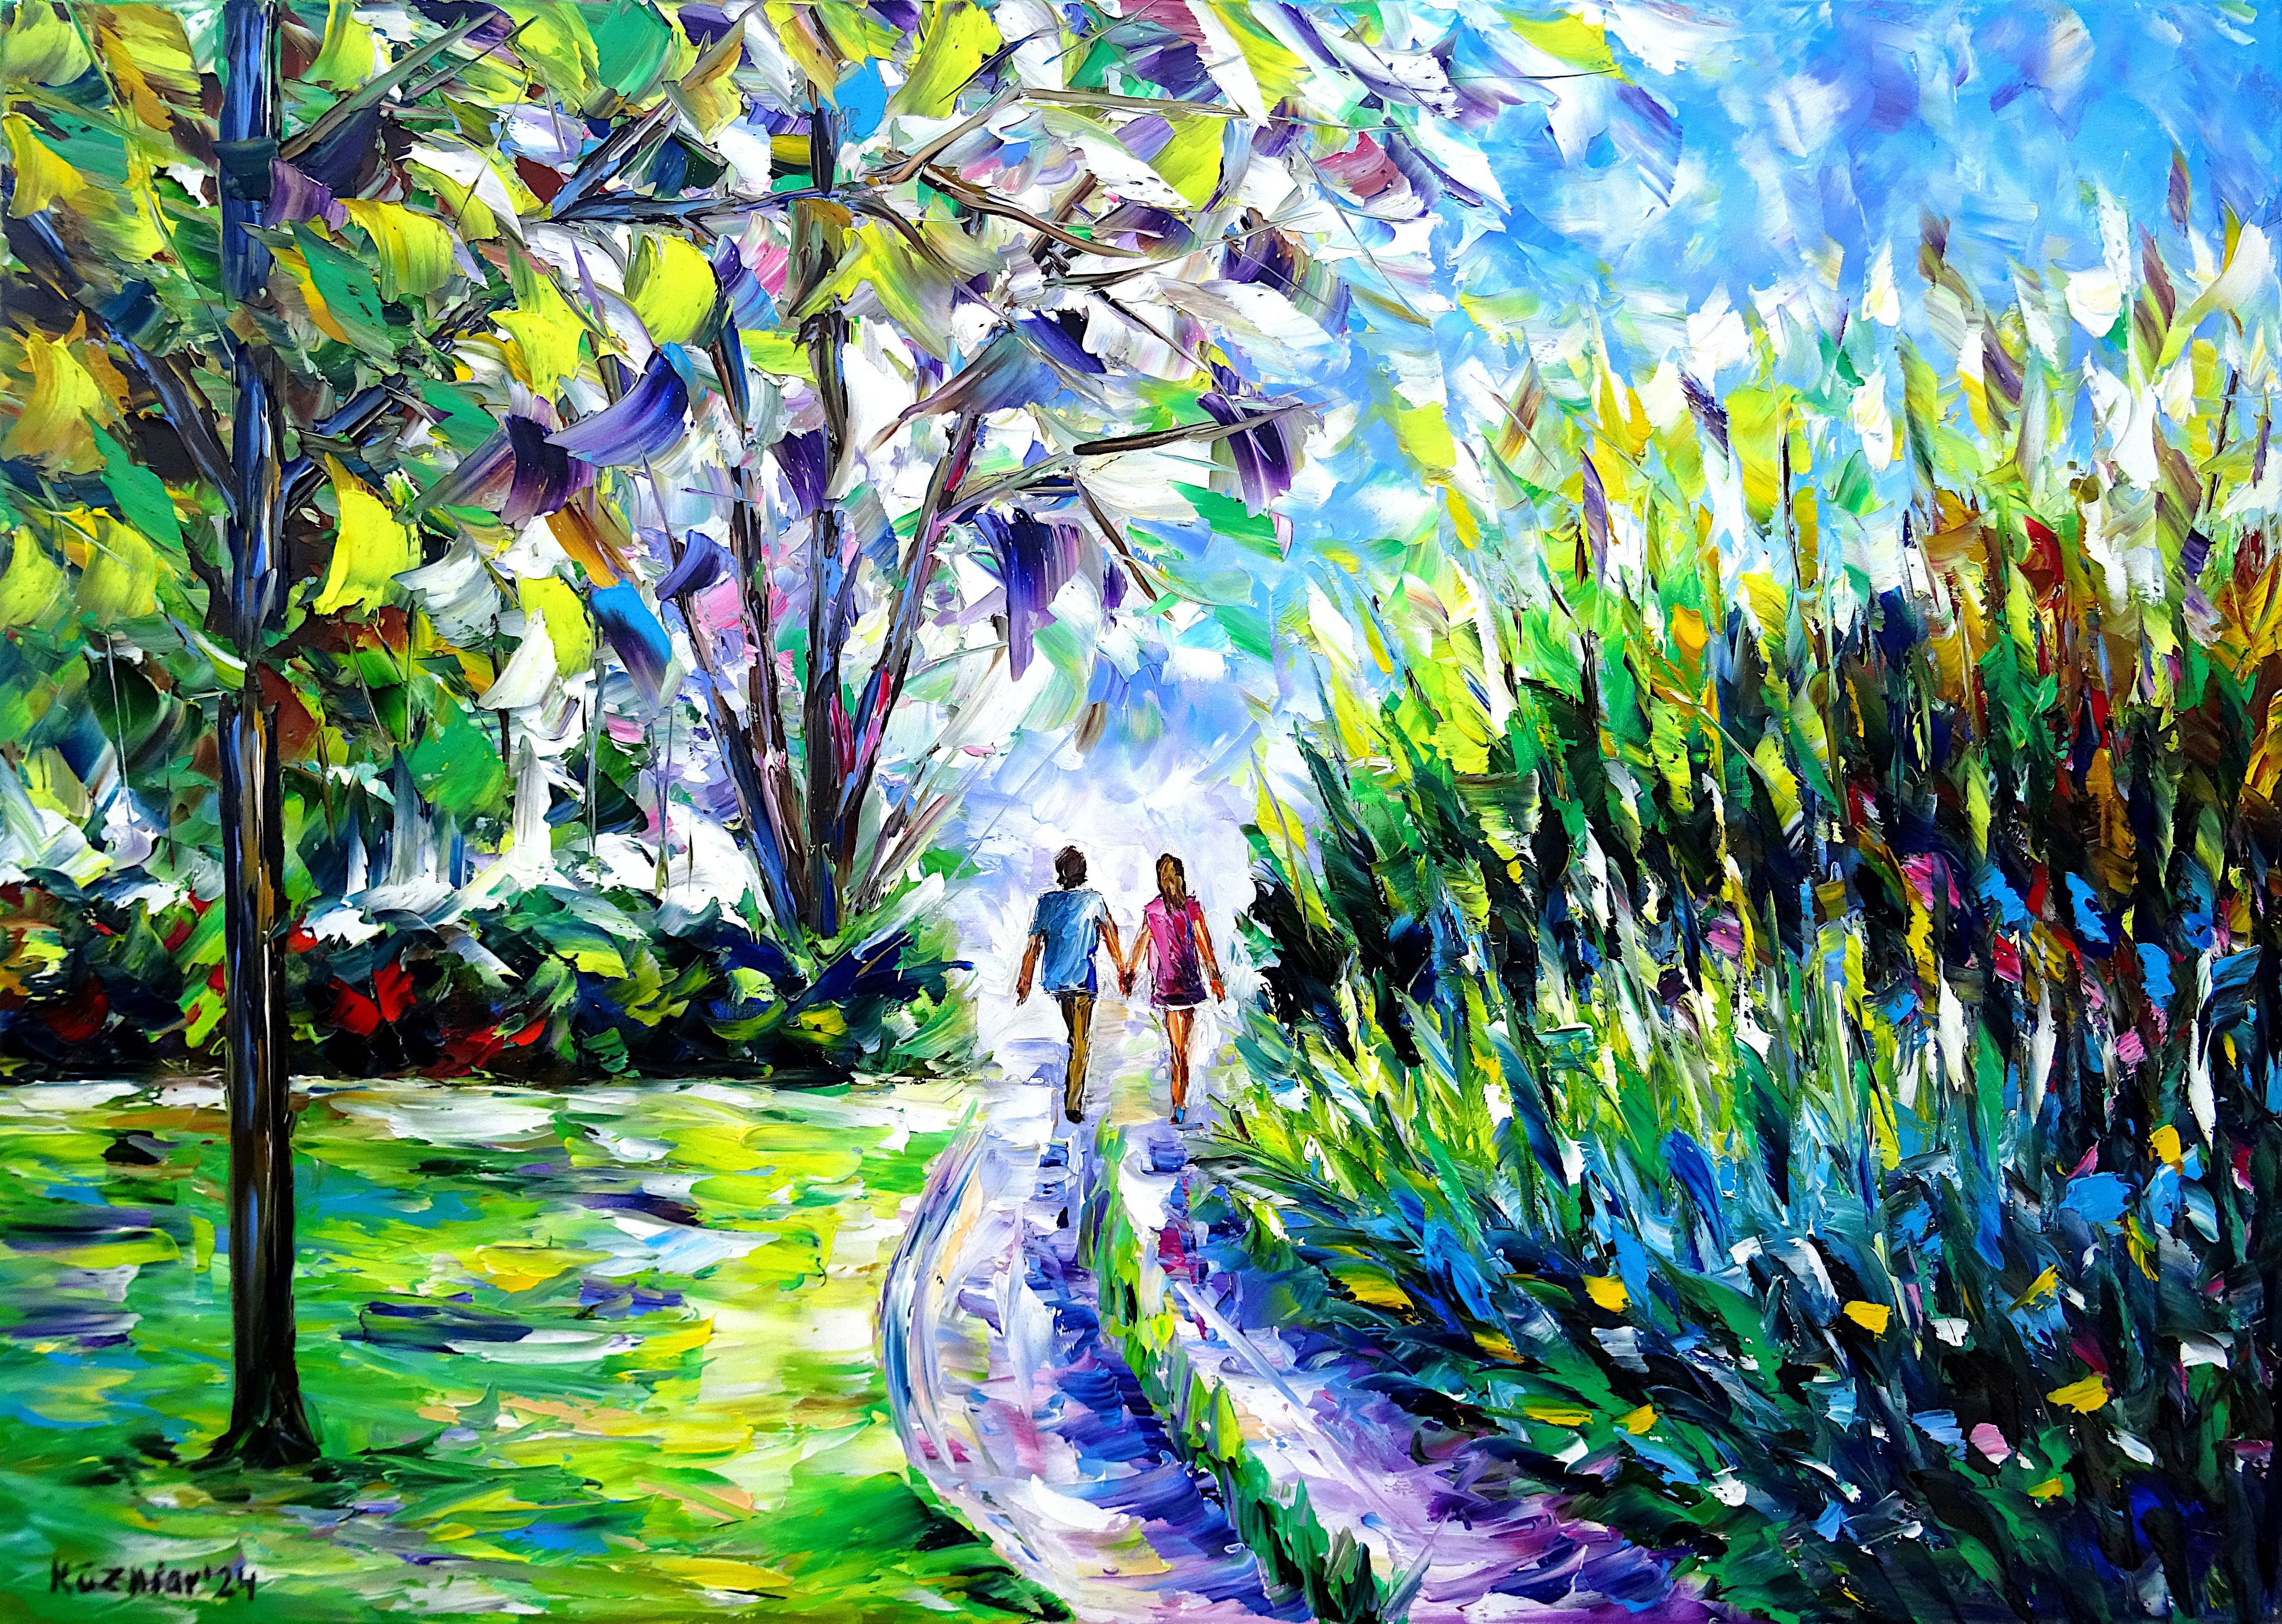 spring landscape,spring park,walking in spring,spring feelings,walk in the park,loving couple in the park,people in love,loving couple hand in hand,holding hands,park romance,romantic scene,lovers holding hands,lovers walking,romantic,love and romance,couple in love,spring colors,spring picture,spring painting,spring green,people in spring,lovers in spring,spring scent,spring beauty,spring,spring trees,park abstract,romantic day,green landscape,peaceful picture,beautiful time,palette knife oil painting,expressive art,expressive painting,expressionism,lively colors,colorful painting,impasto painting,figurative